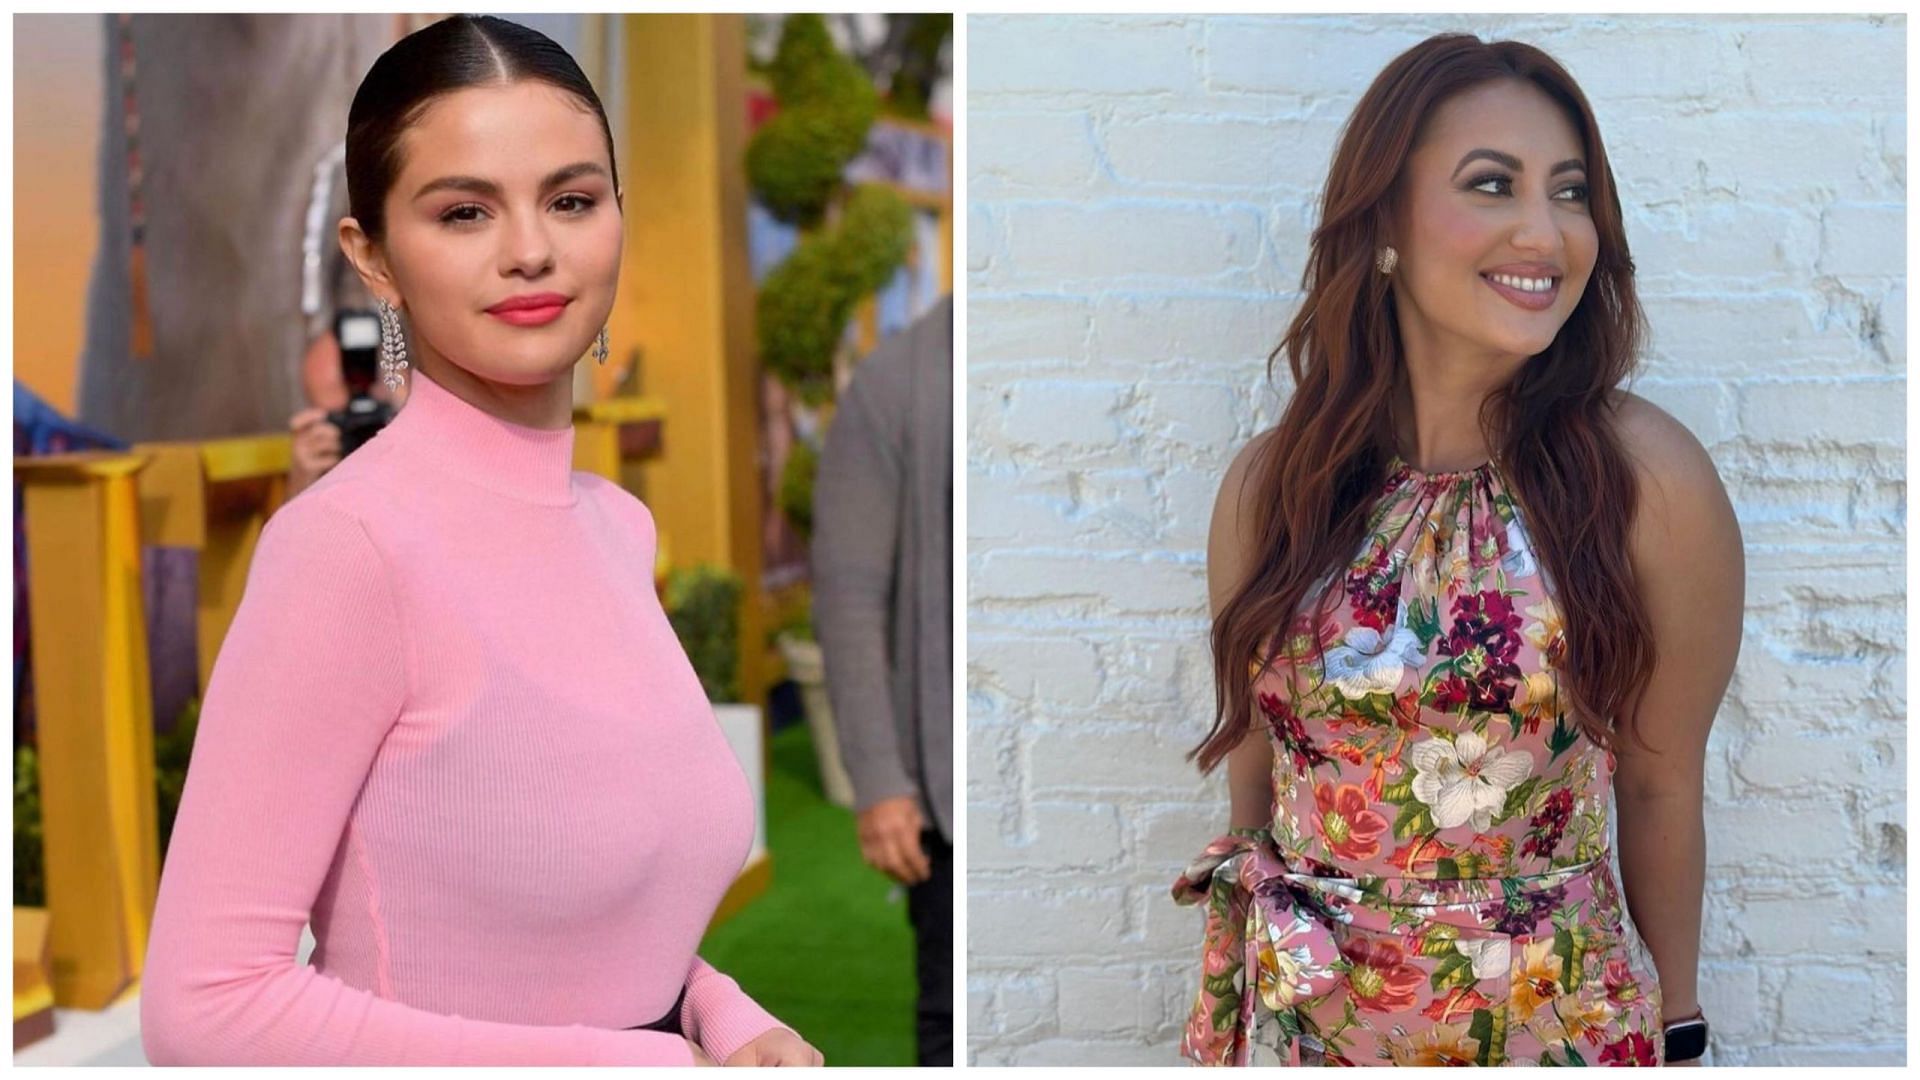 Are Selena Gomez and Francia Raisa still friends? How the relationship of &quot;best friends&quot; unraveled after the singer&#039;s kidney transplant. (Image via Instagram/ @selenagomez, @franciaraisa)